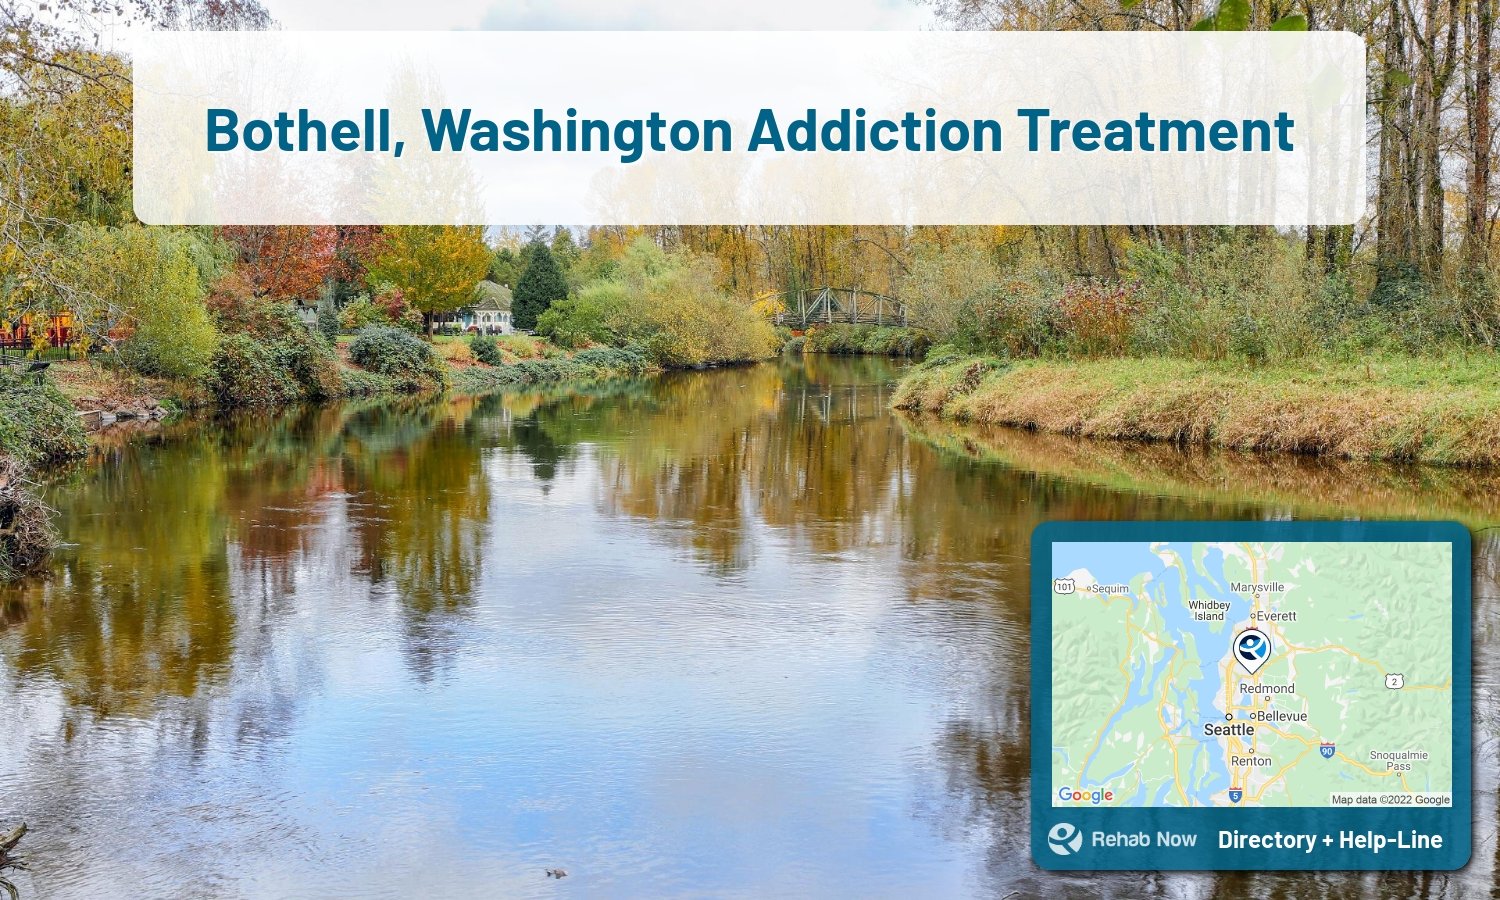 Bothell, WA Treatment Centers. Find drug rehab in Bothell, Washington, or detox and treatment programs. Get the right help now!